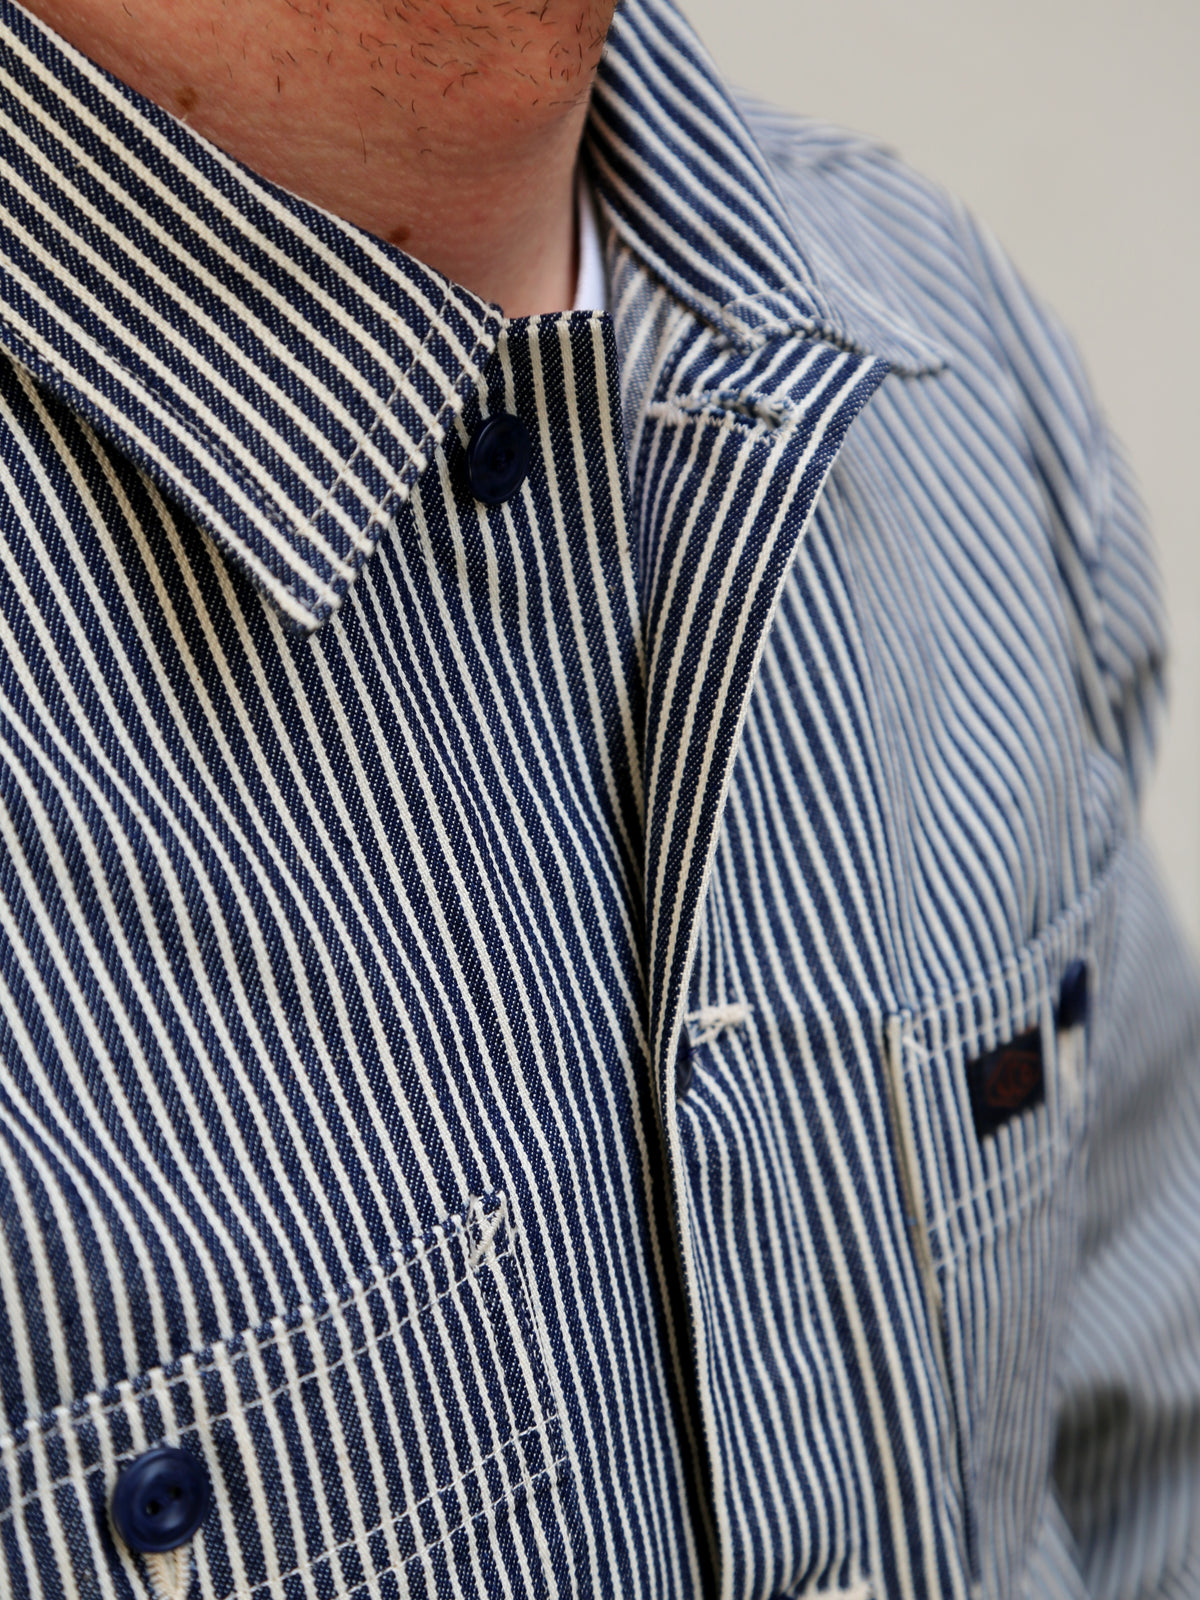 Nudie Jeans Vincent Hickory Stripe Shirt